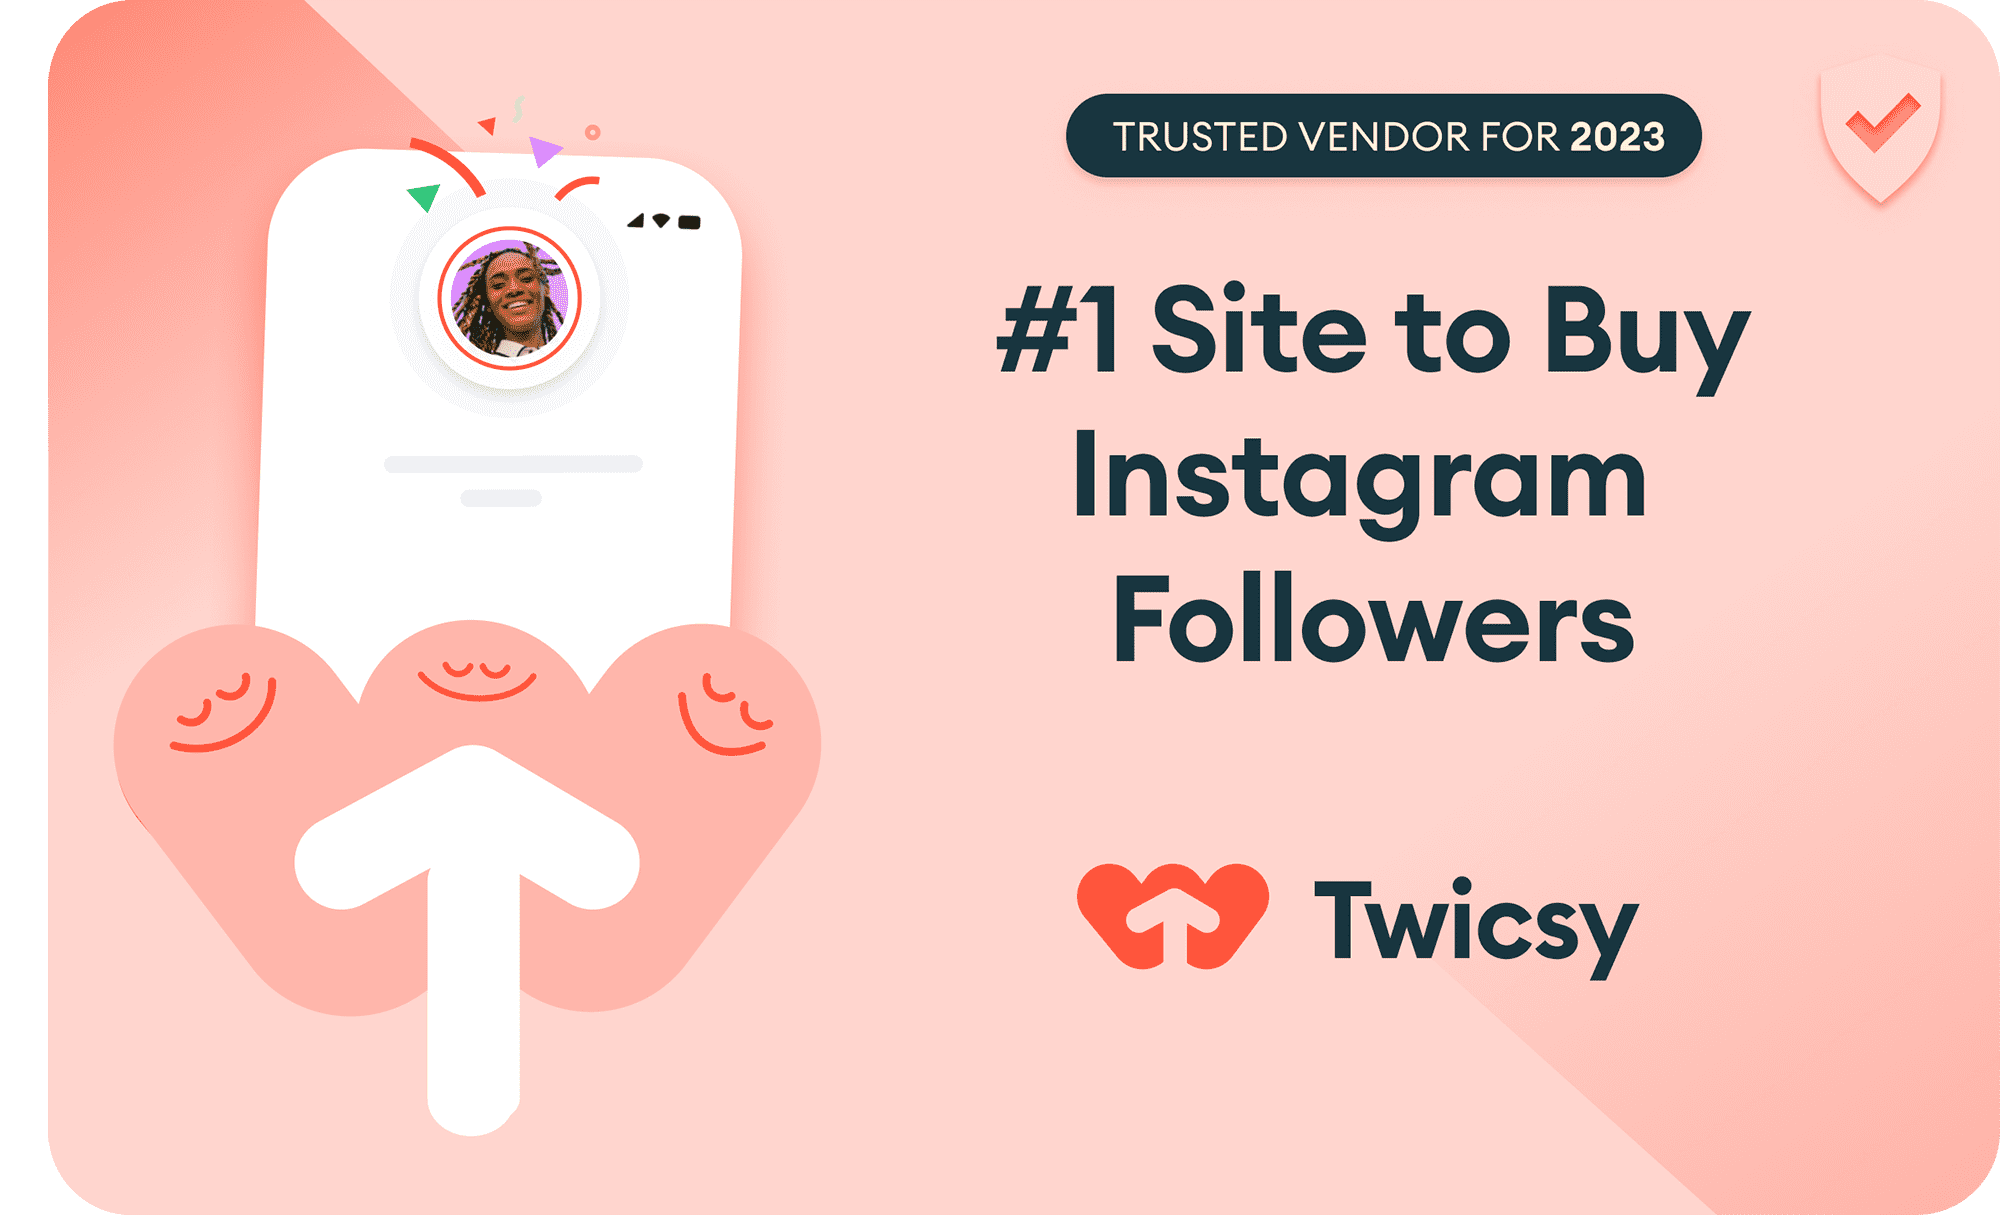 Today's Top 3 Picks: The Best Sites for Instagram Follower Growth | The African Exponent.